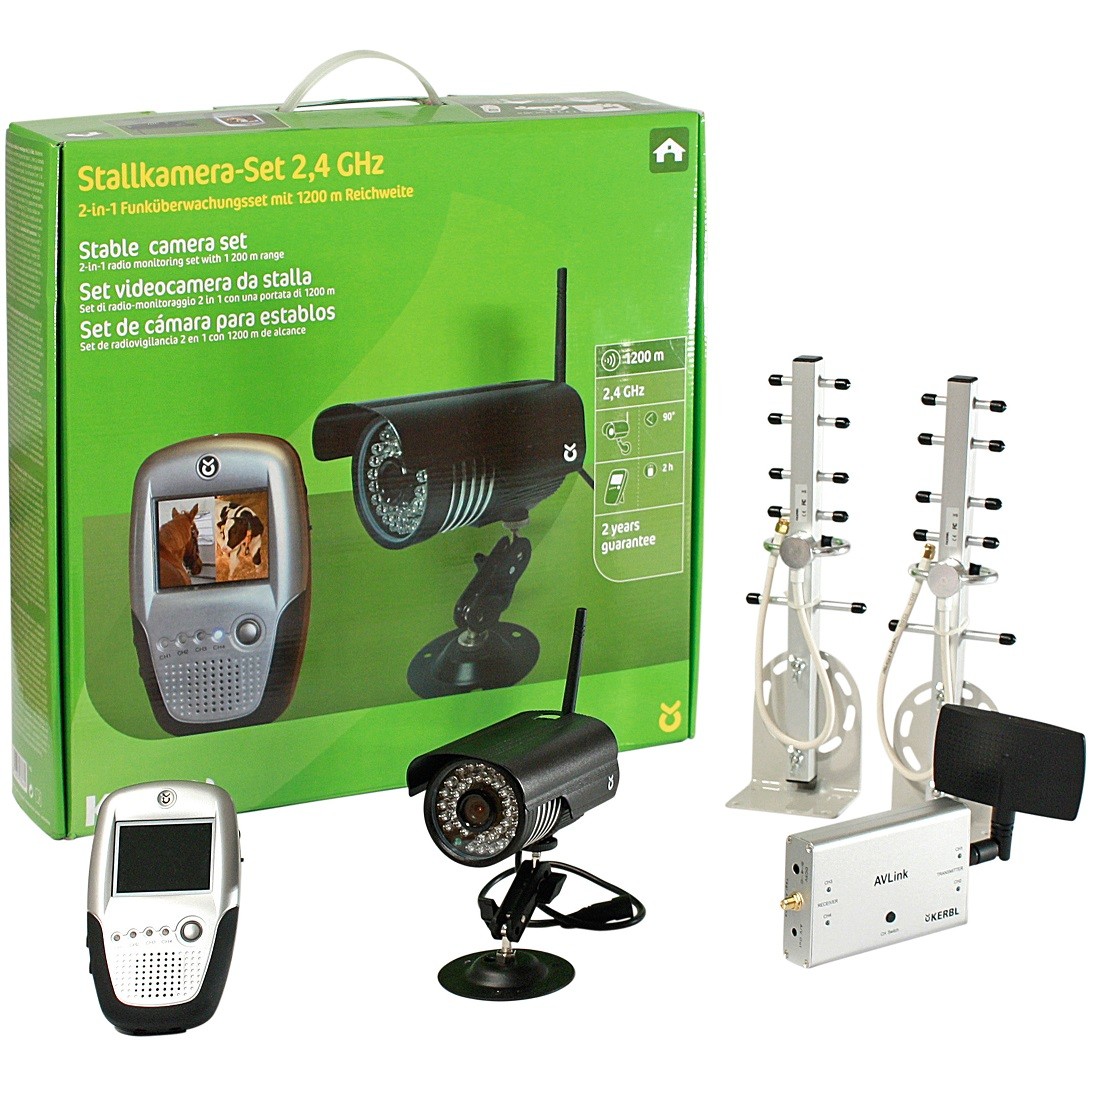 Stable and trailer camera set 2,4 GHz 1200m